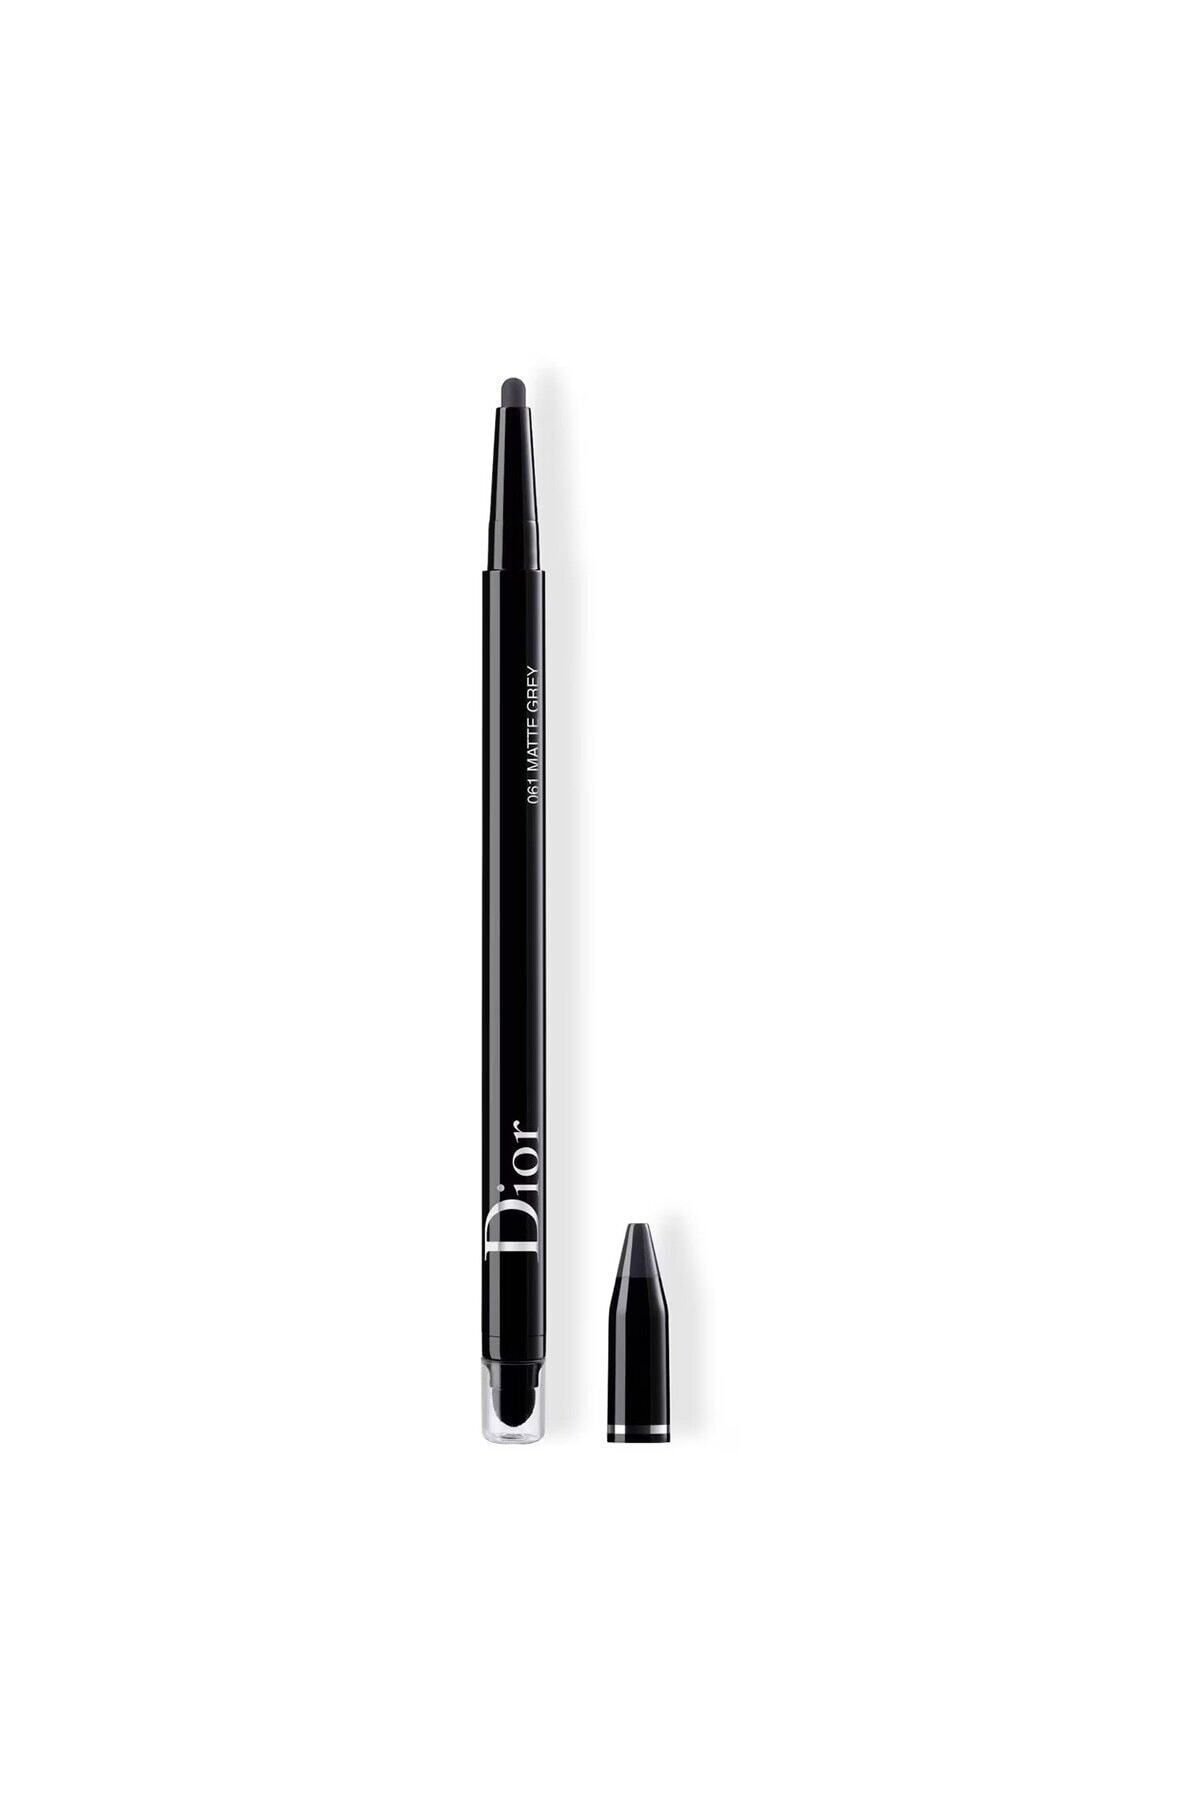 Dior SHOW 24H* STYLO WATERPROOF - 24 HOUR LASTİNG AND HİGH INTENSİTY APPEARANCE EYELİNER PSSN1960